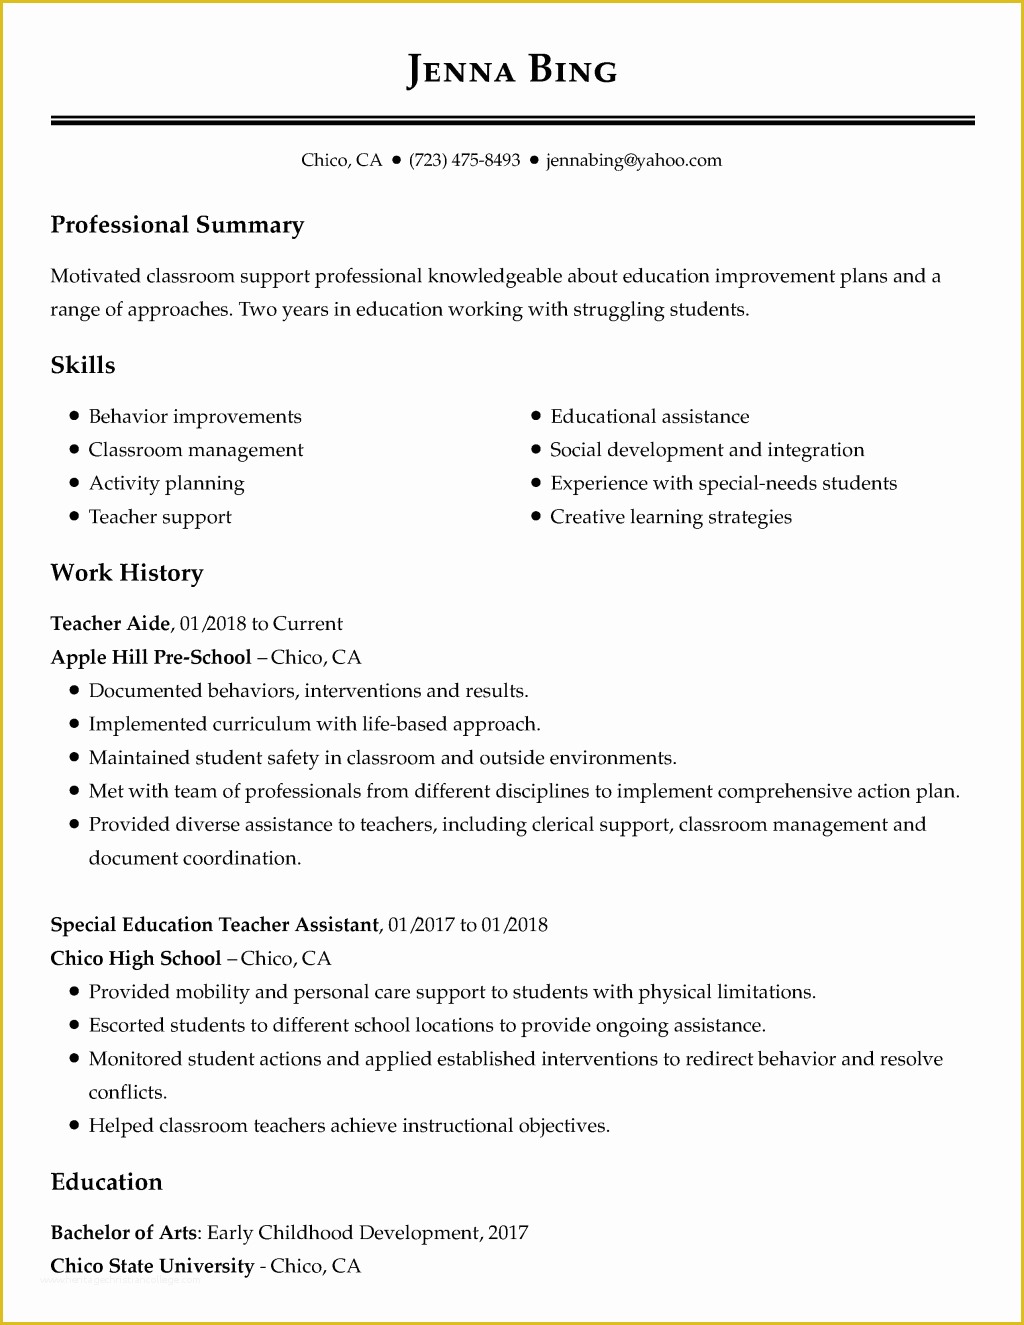 View Free Resume Templates Of Resume and Template 63 Free Resume Samples Line